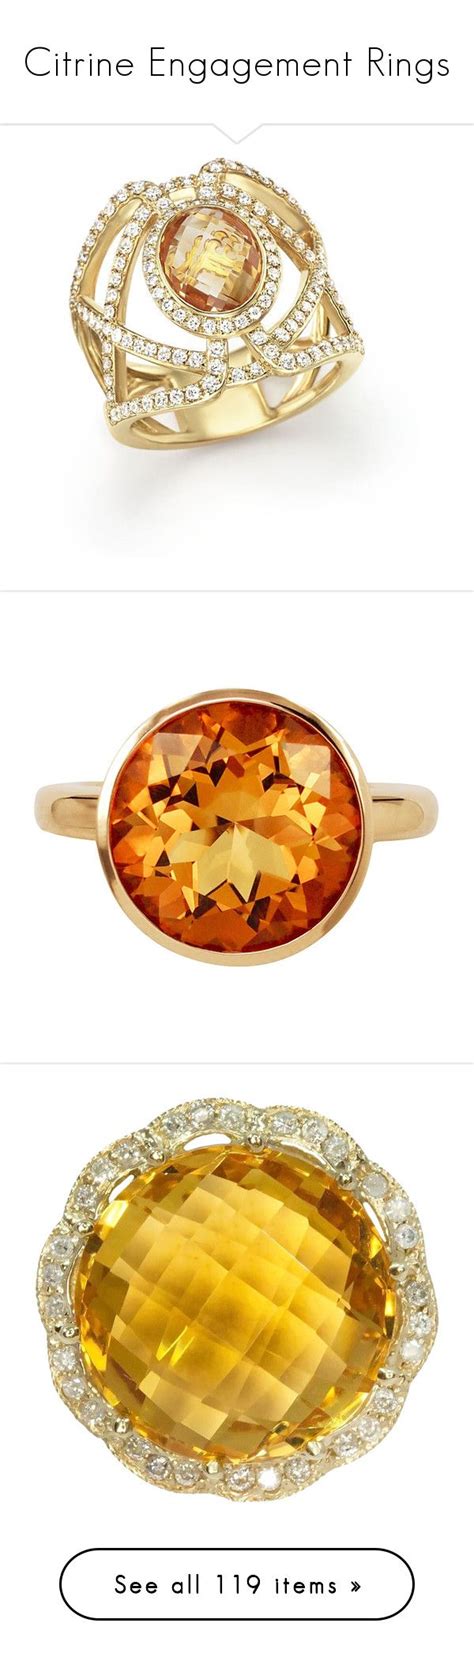 Citrine Engagement Rings By Helenemoney Liked On Polyvore Featuring Jewelry Rings Jewelries